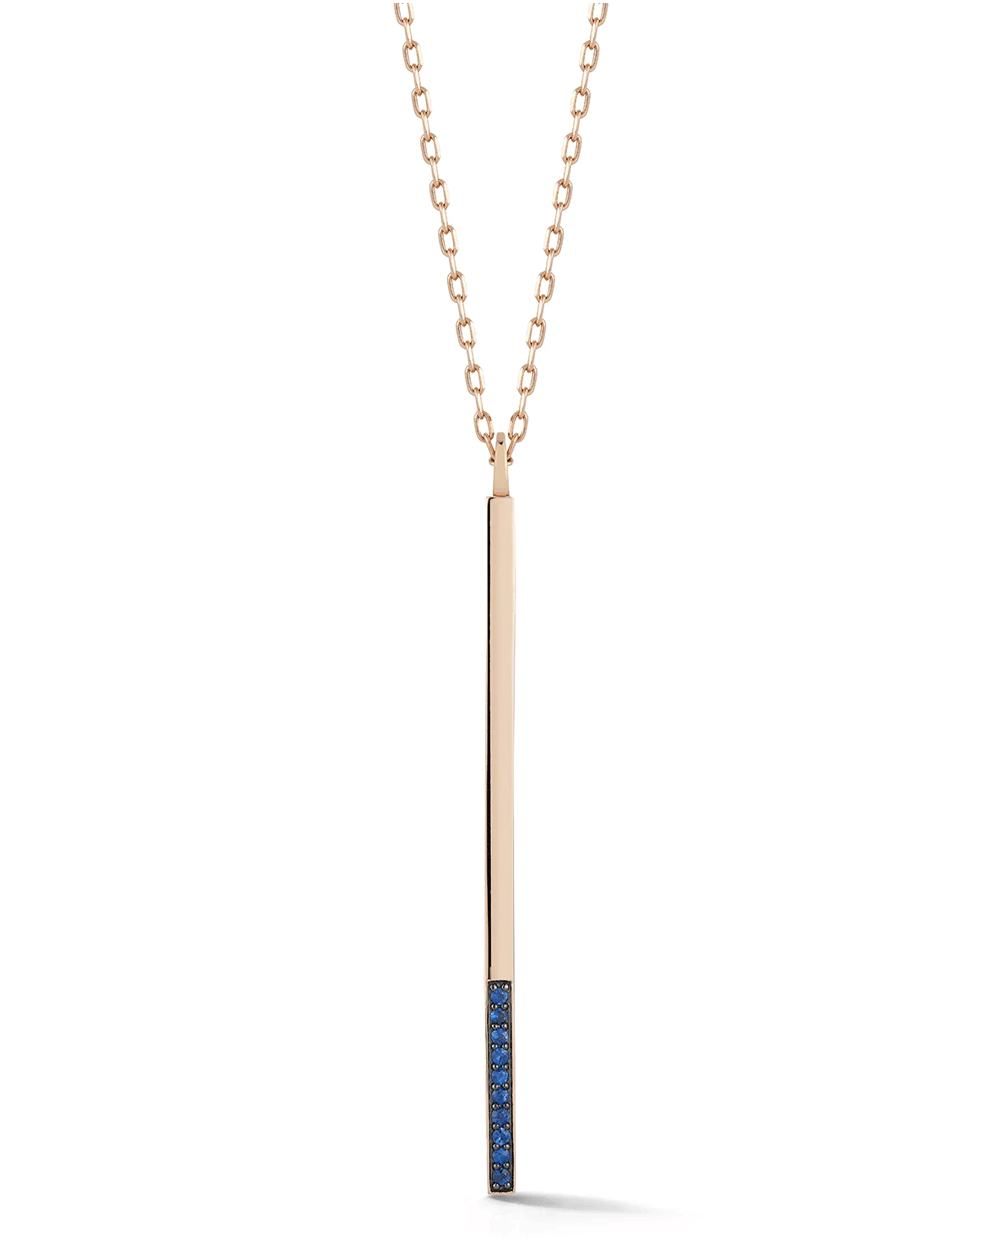 Grant 18k Rose Gold and Blue Sapphire Bar Charm